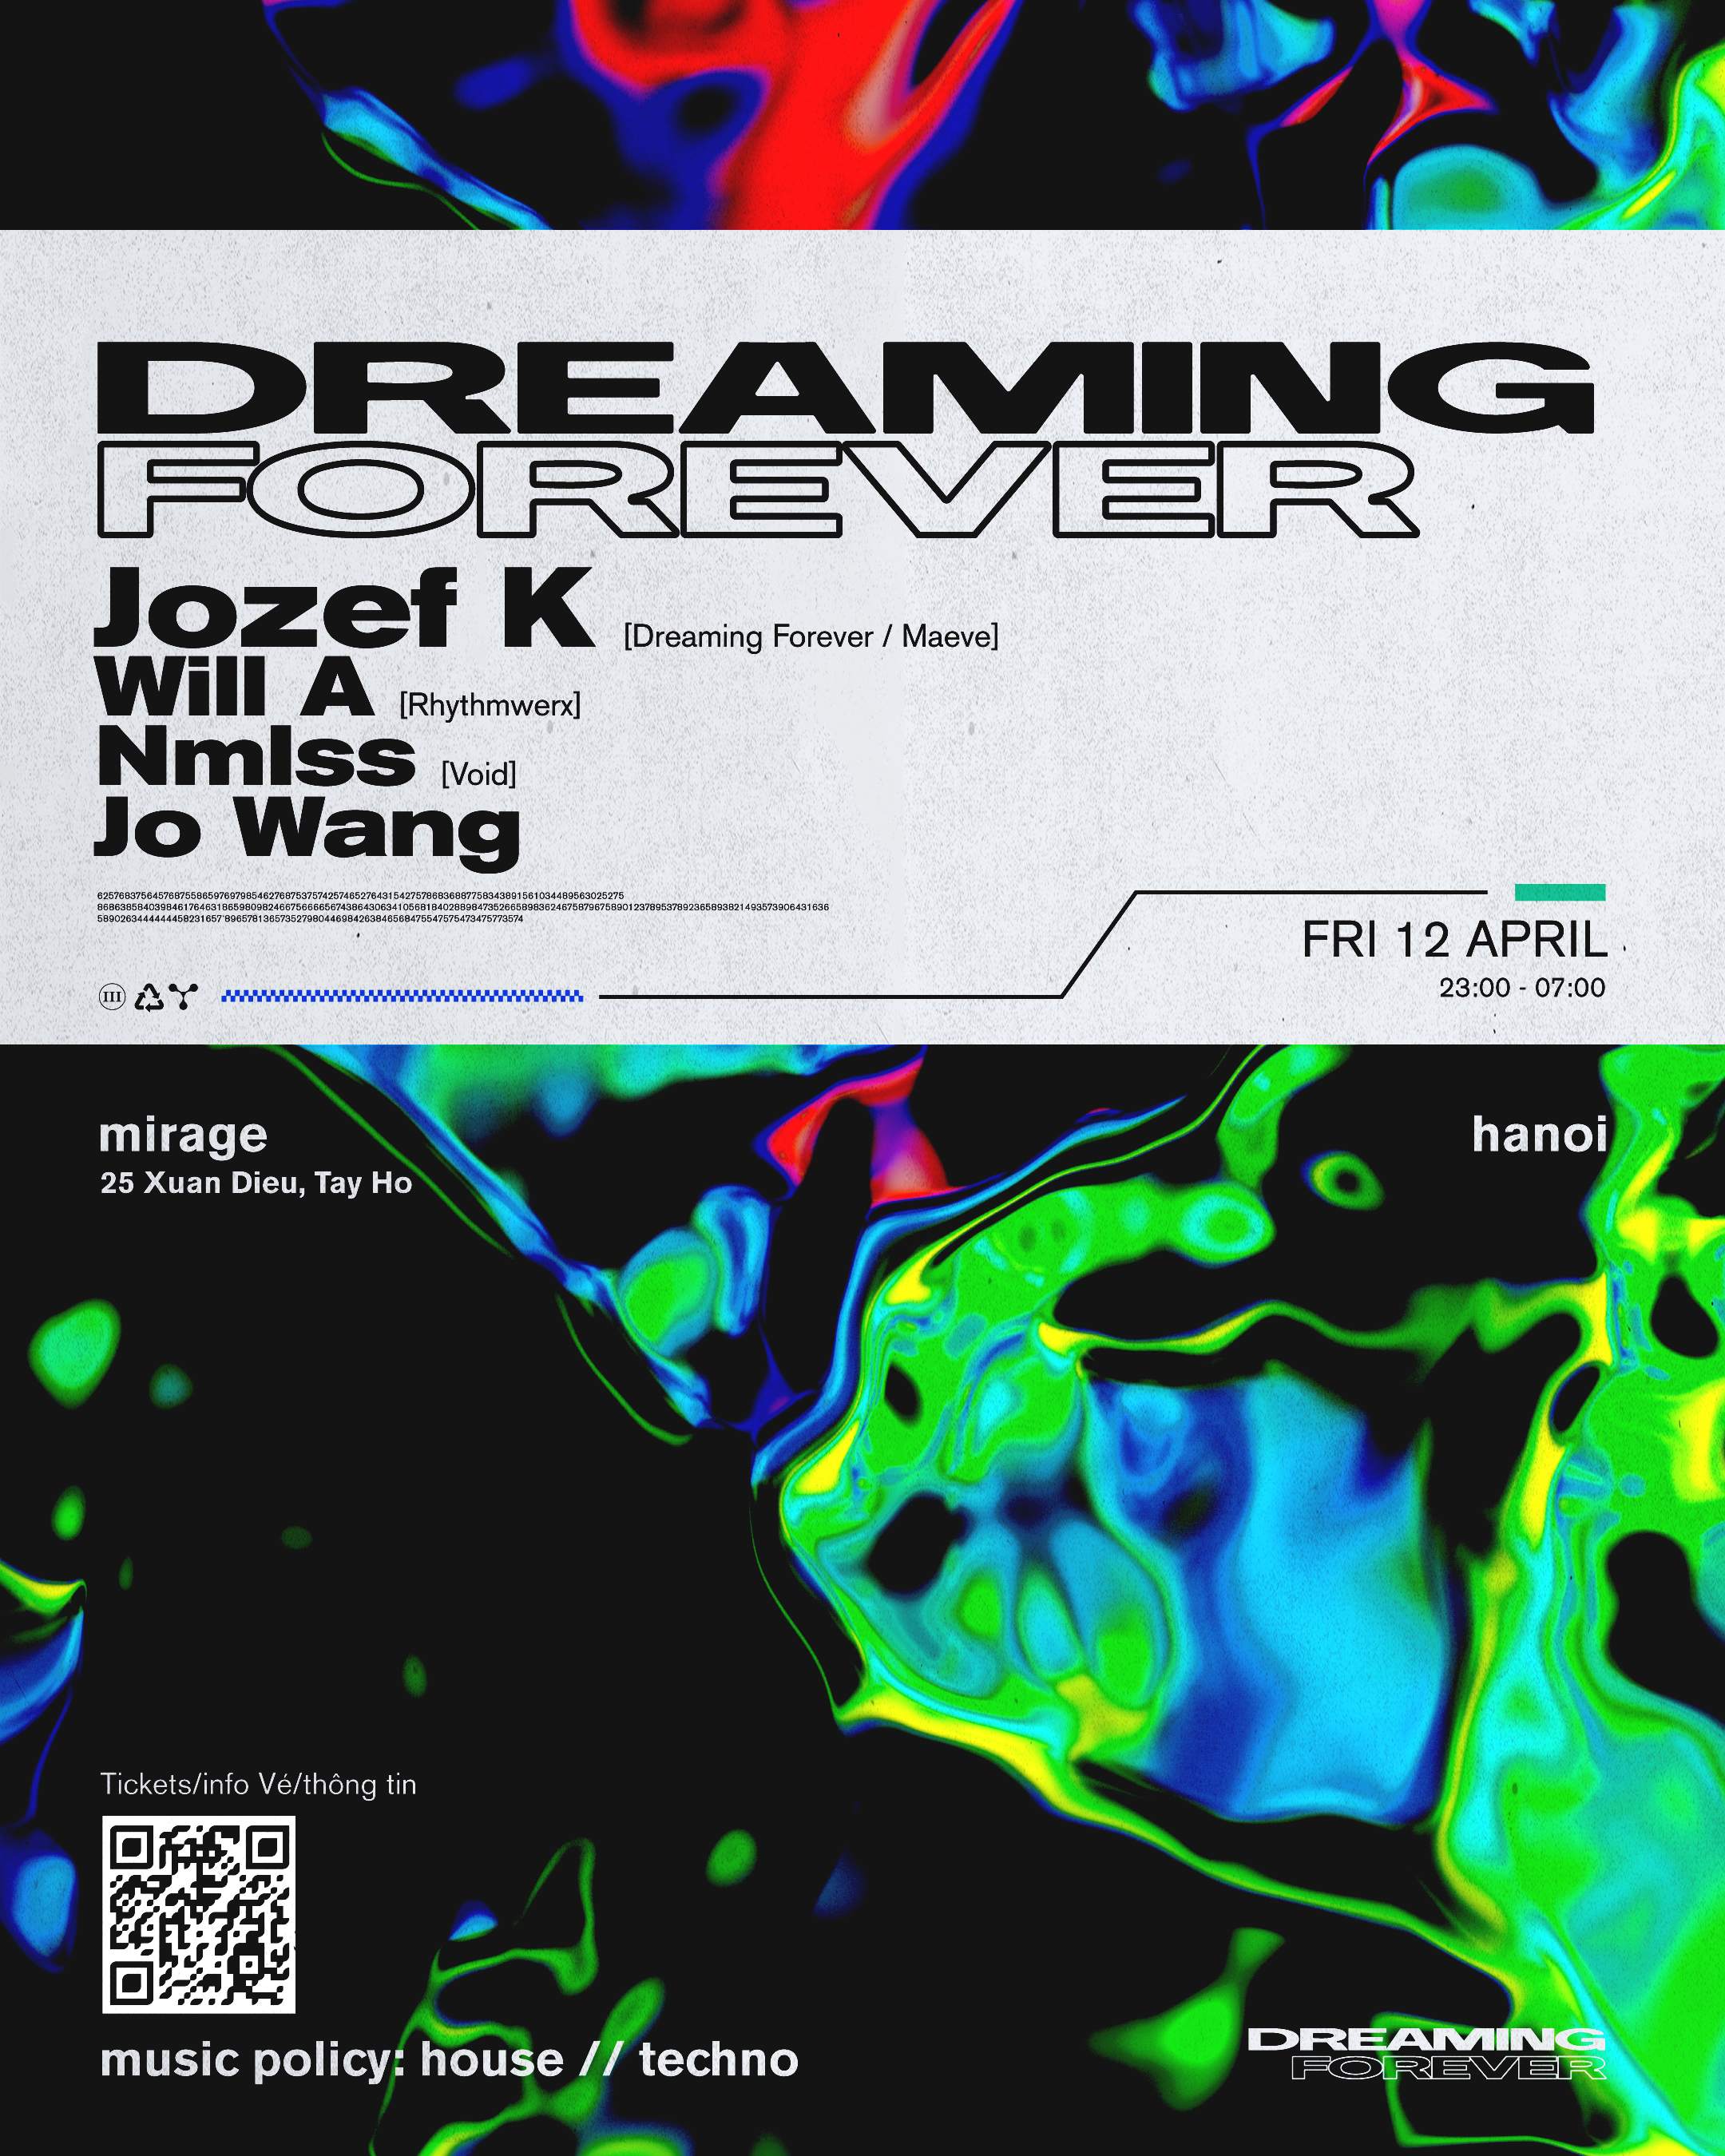 Dreaming Forever - Jozef K, Will A, nmlss - Página frontal